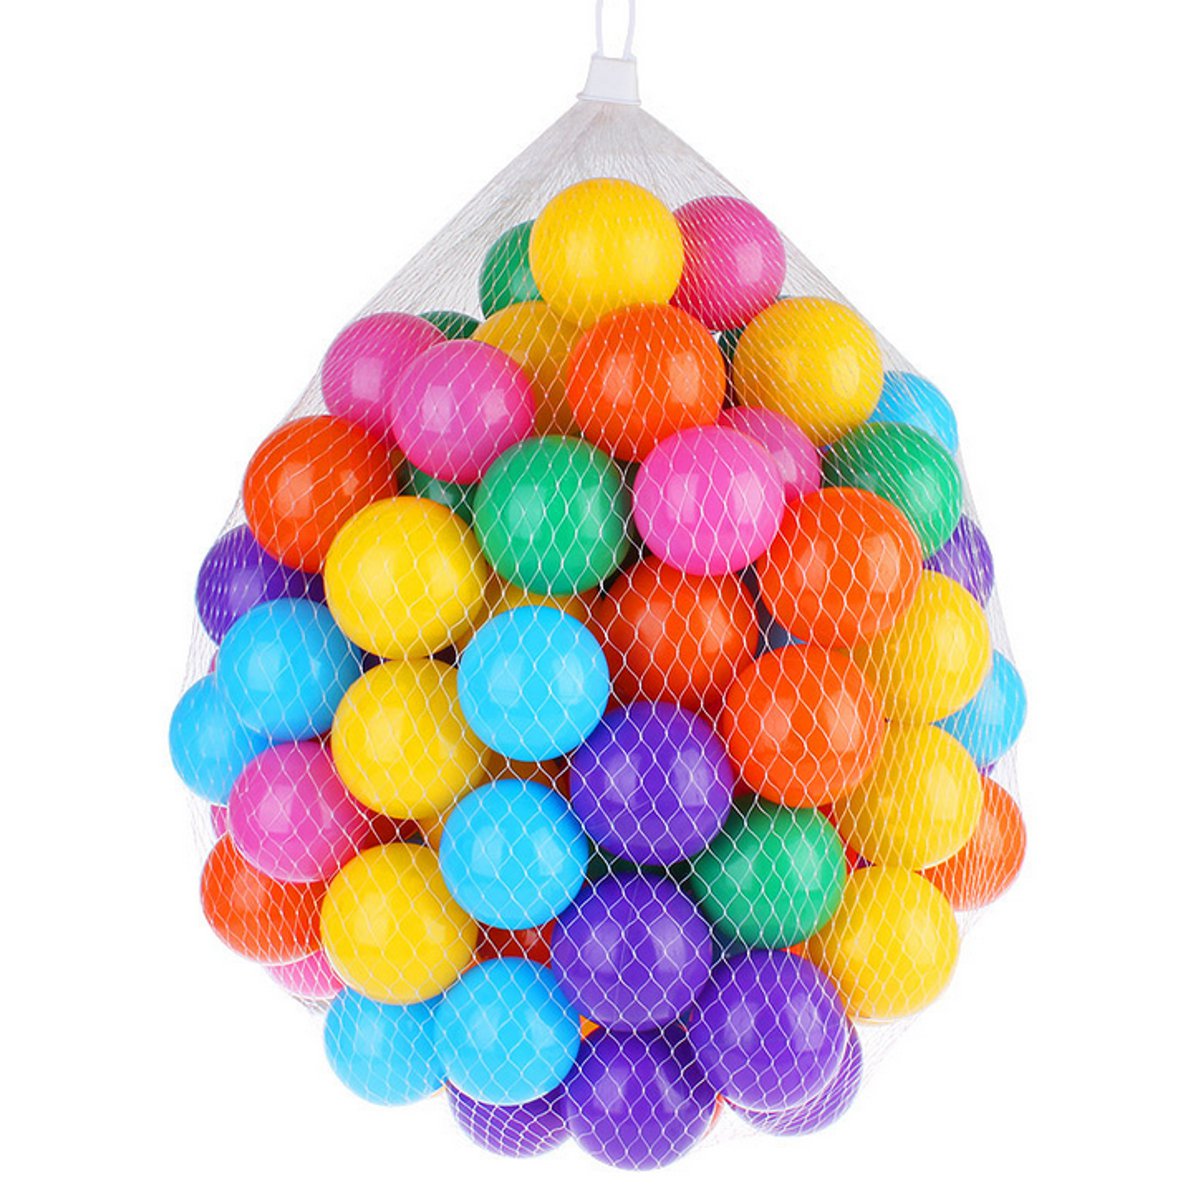 100pcs-Soft-Plastic-Ocean-Ball-7cm-Quality-Secure-Baby-Kid-Pit-Toy-Swim-Colorful-Ball-Toys-1426288